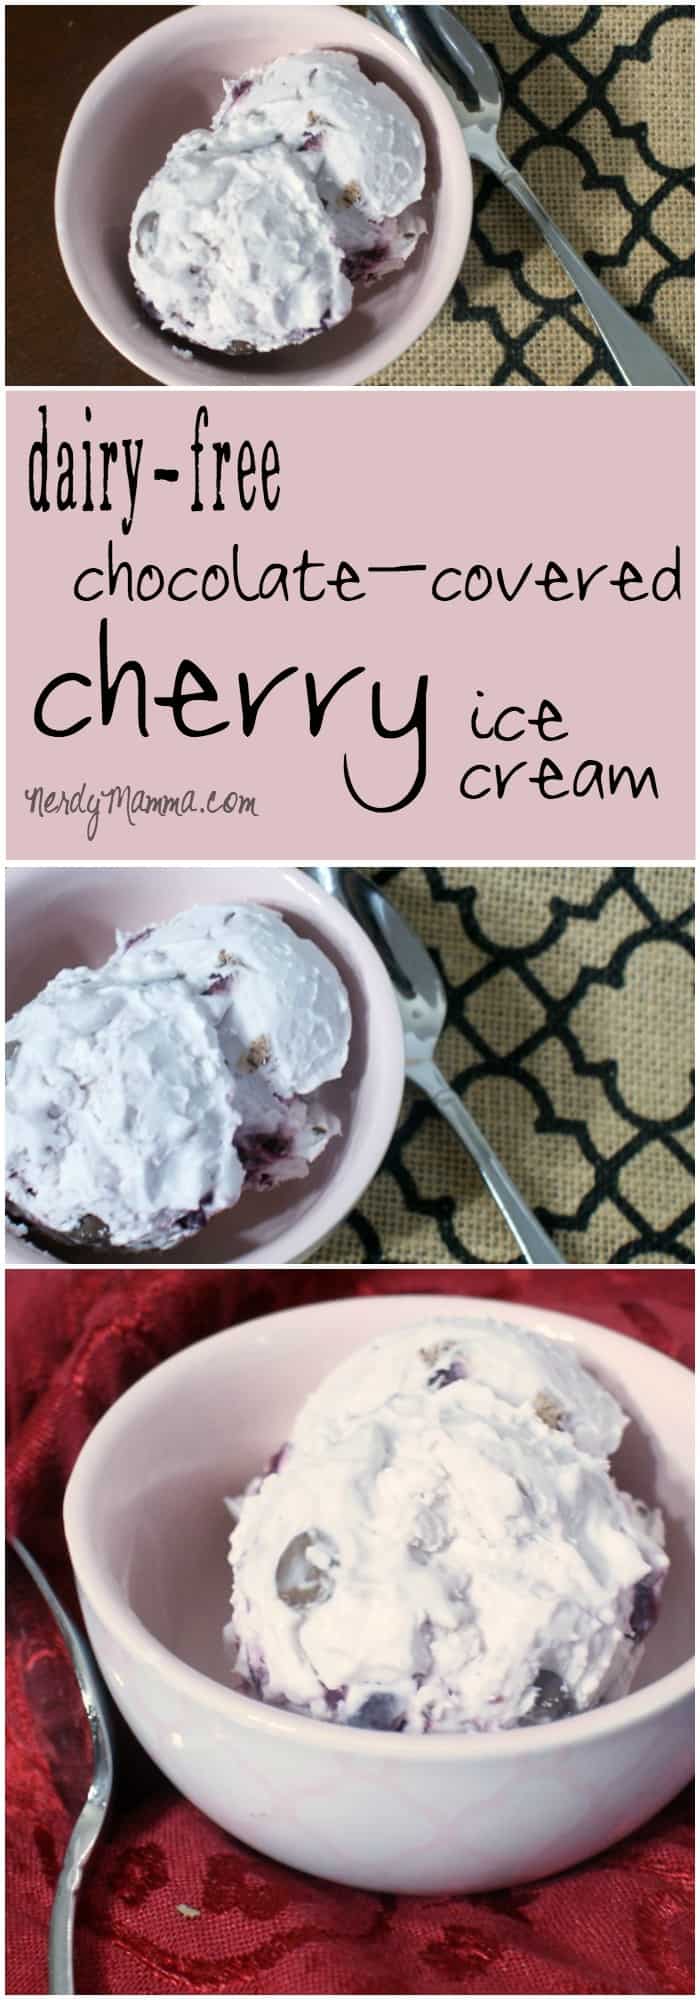 This dairy-free chocolate covered cherry ice cream is like a decadent little hug on a hard day. I love this creamy goodness...